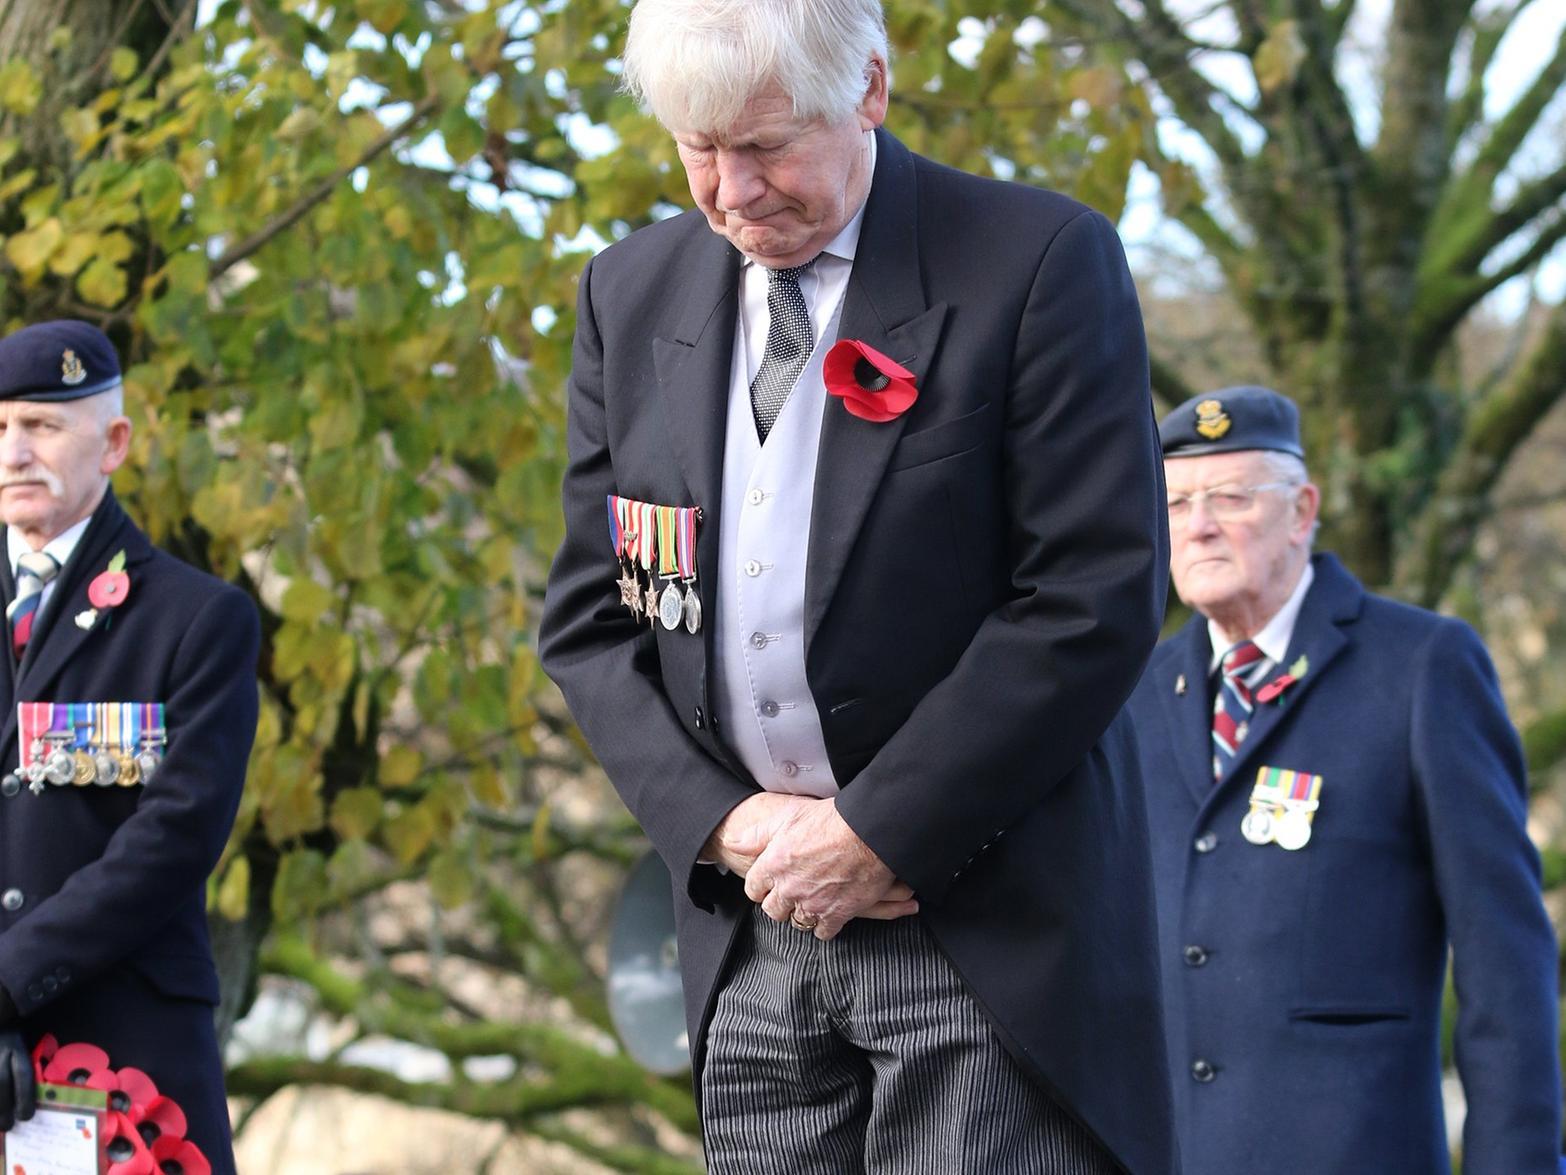 1. Deputy Lieutenant Michael Hall took his traditional role laying the first wreath despite the death of his wife Annie in recent floods